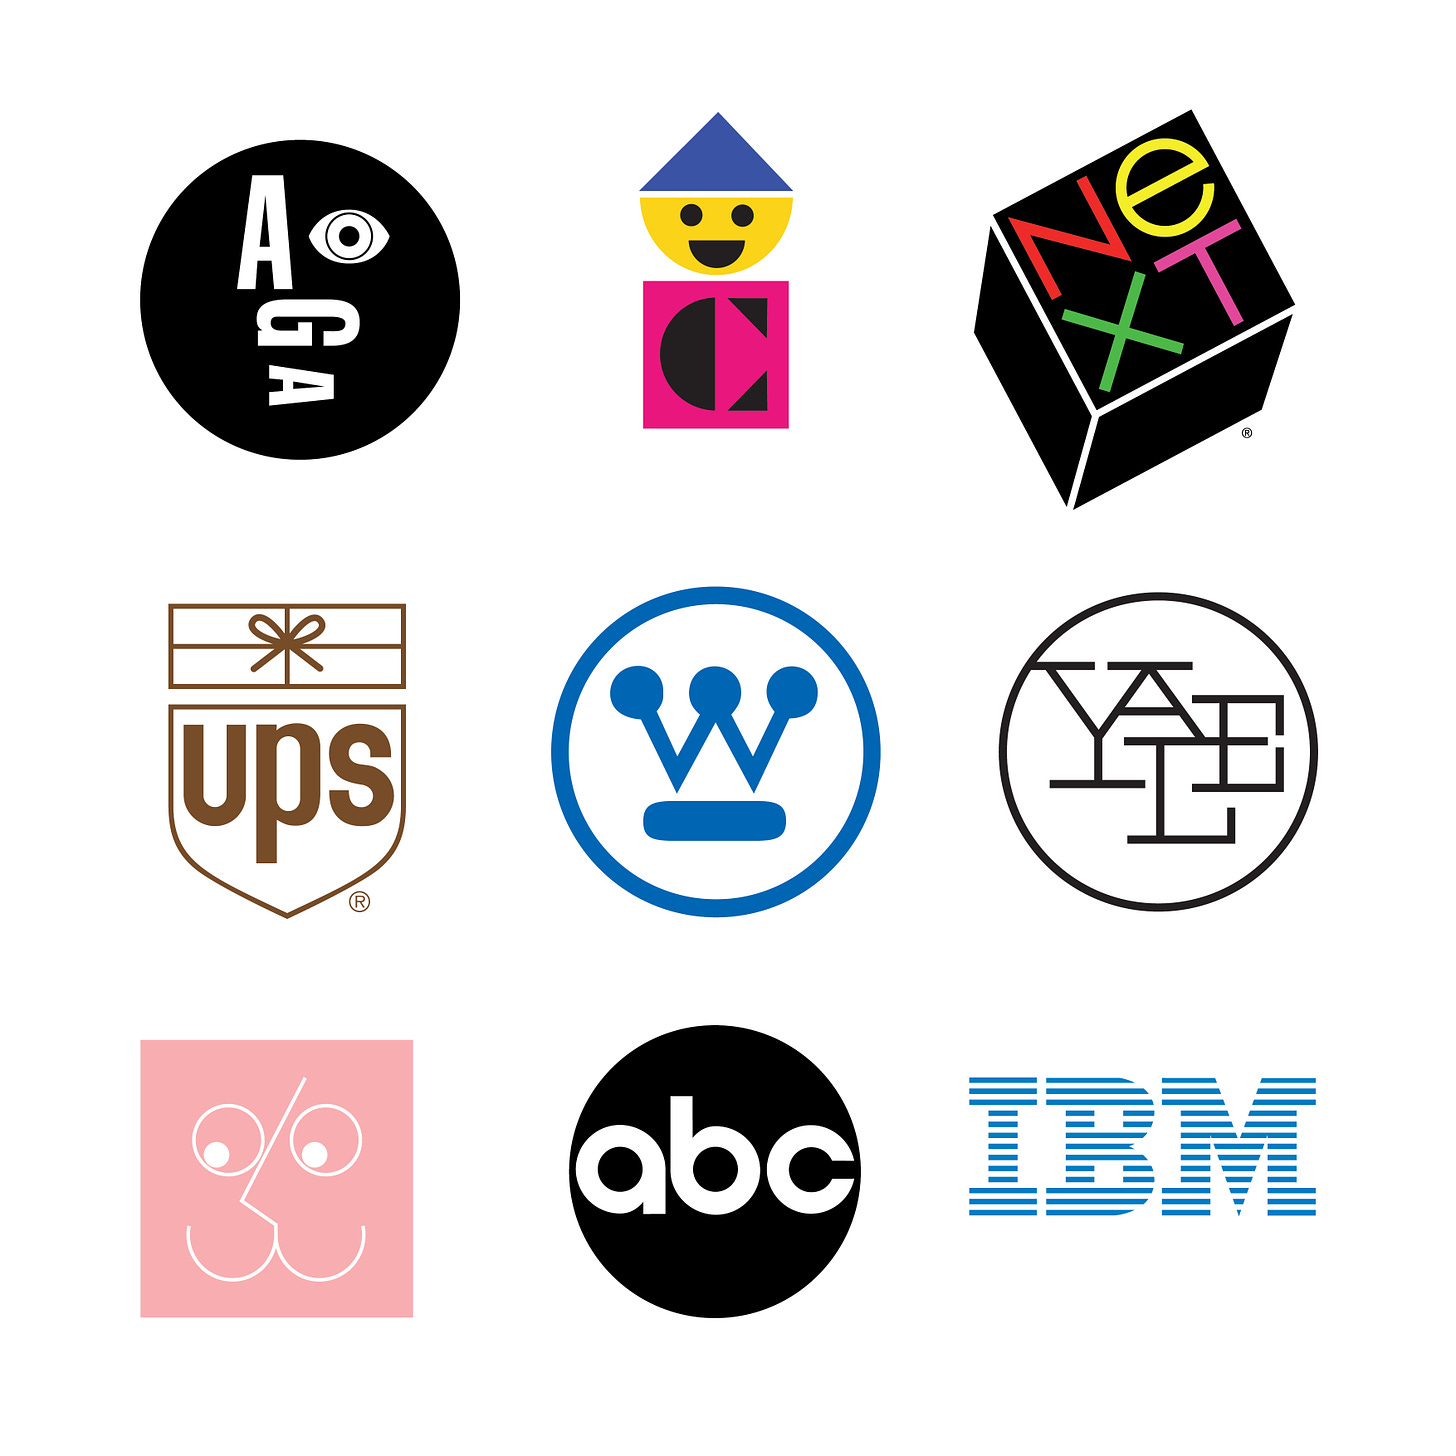 Logotypes designed by Paul Rand